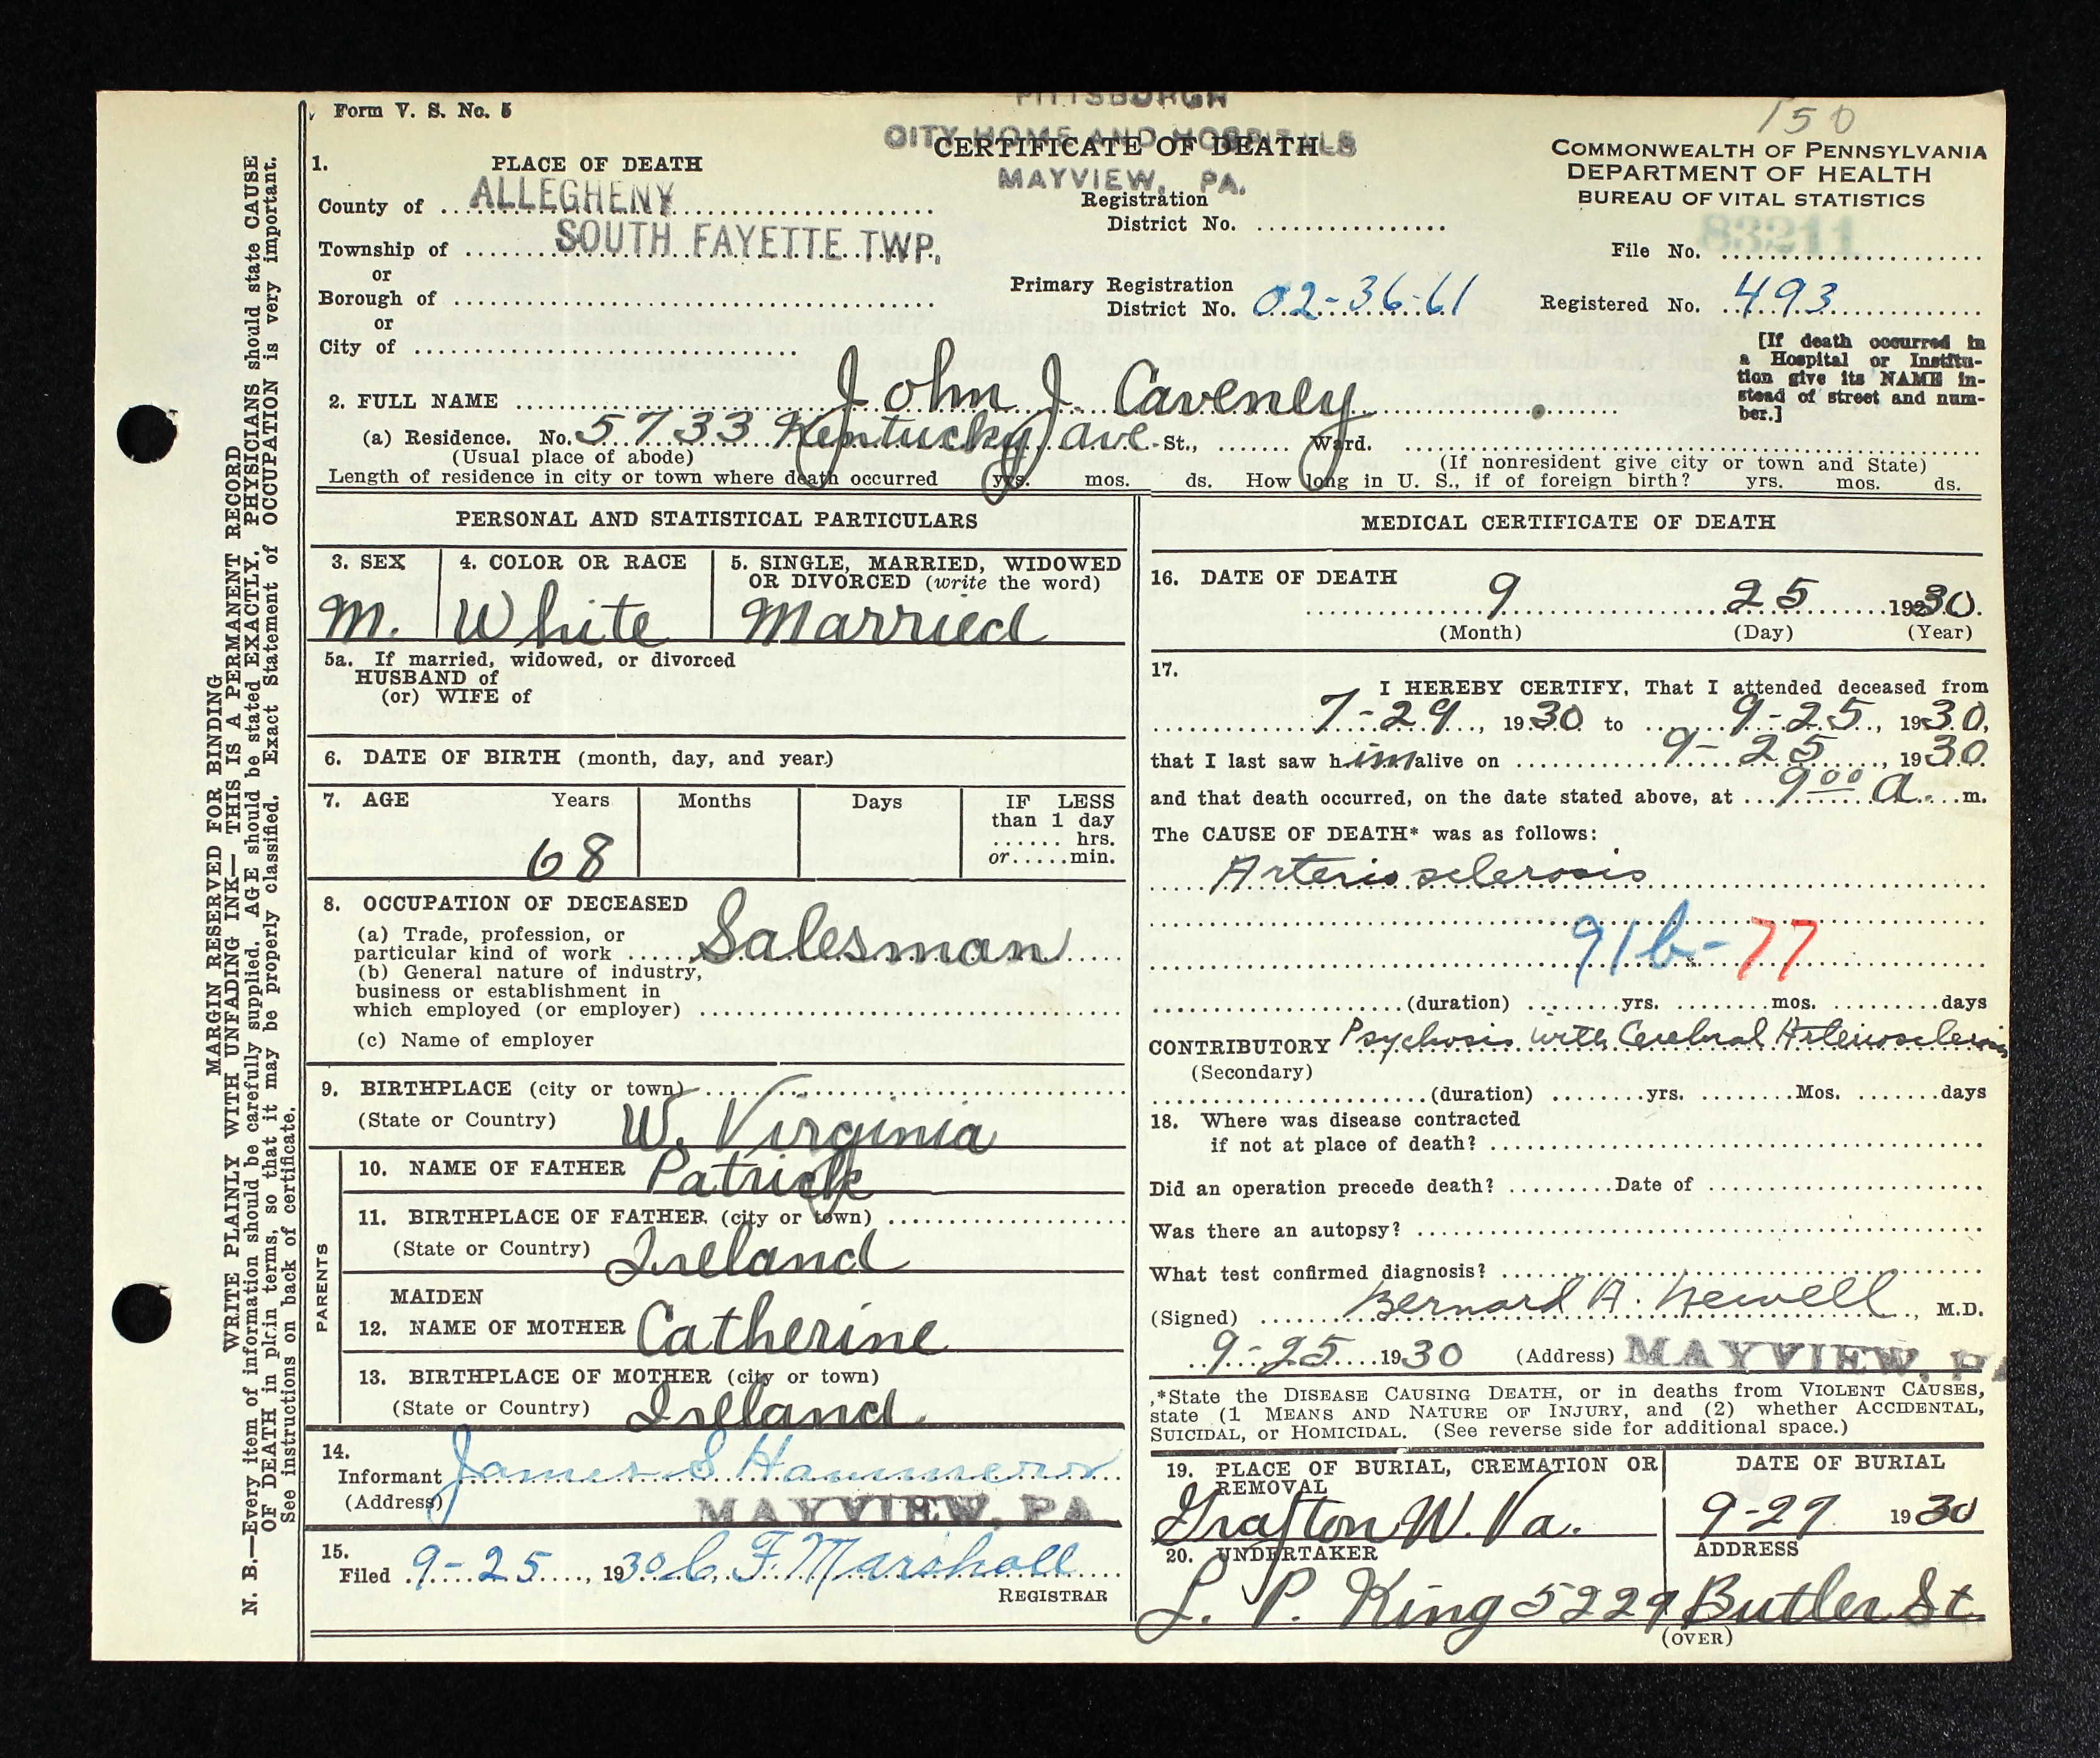 Incorrectly noted as John J. This is for John F. Caveney death certificate